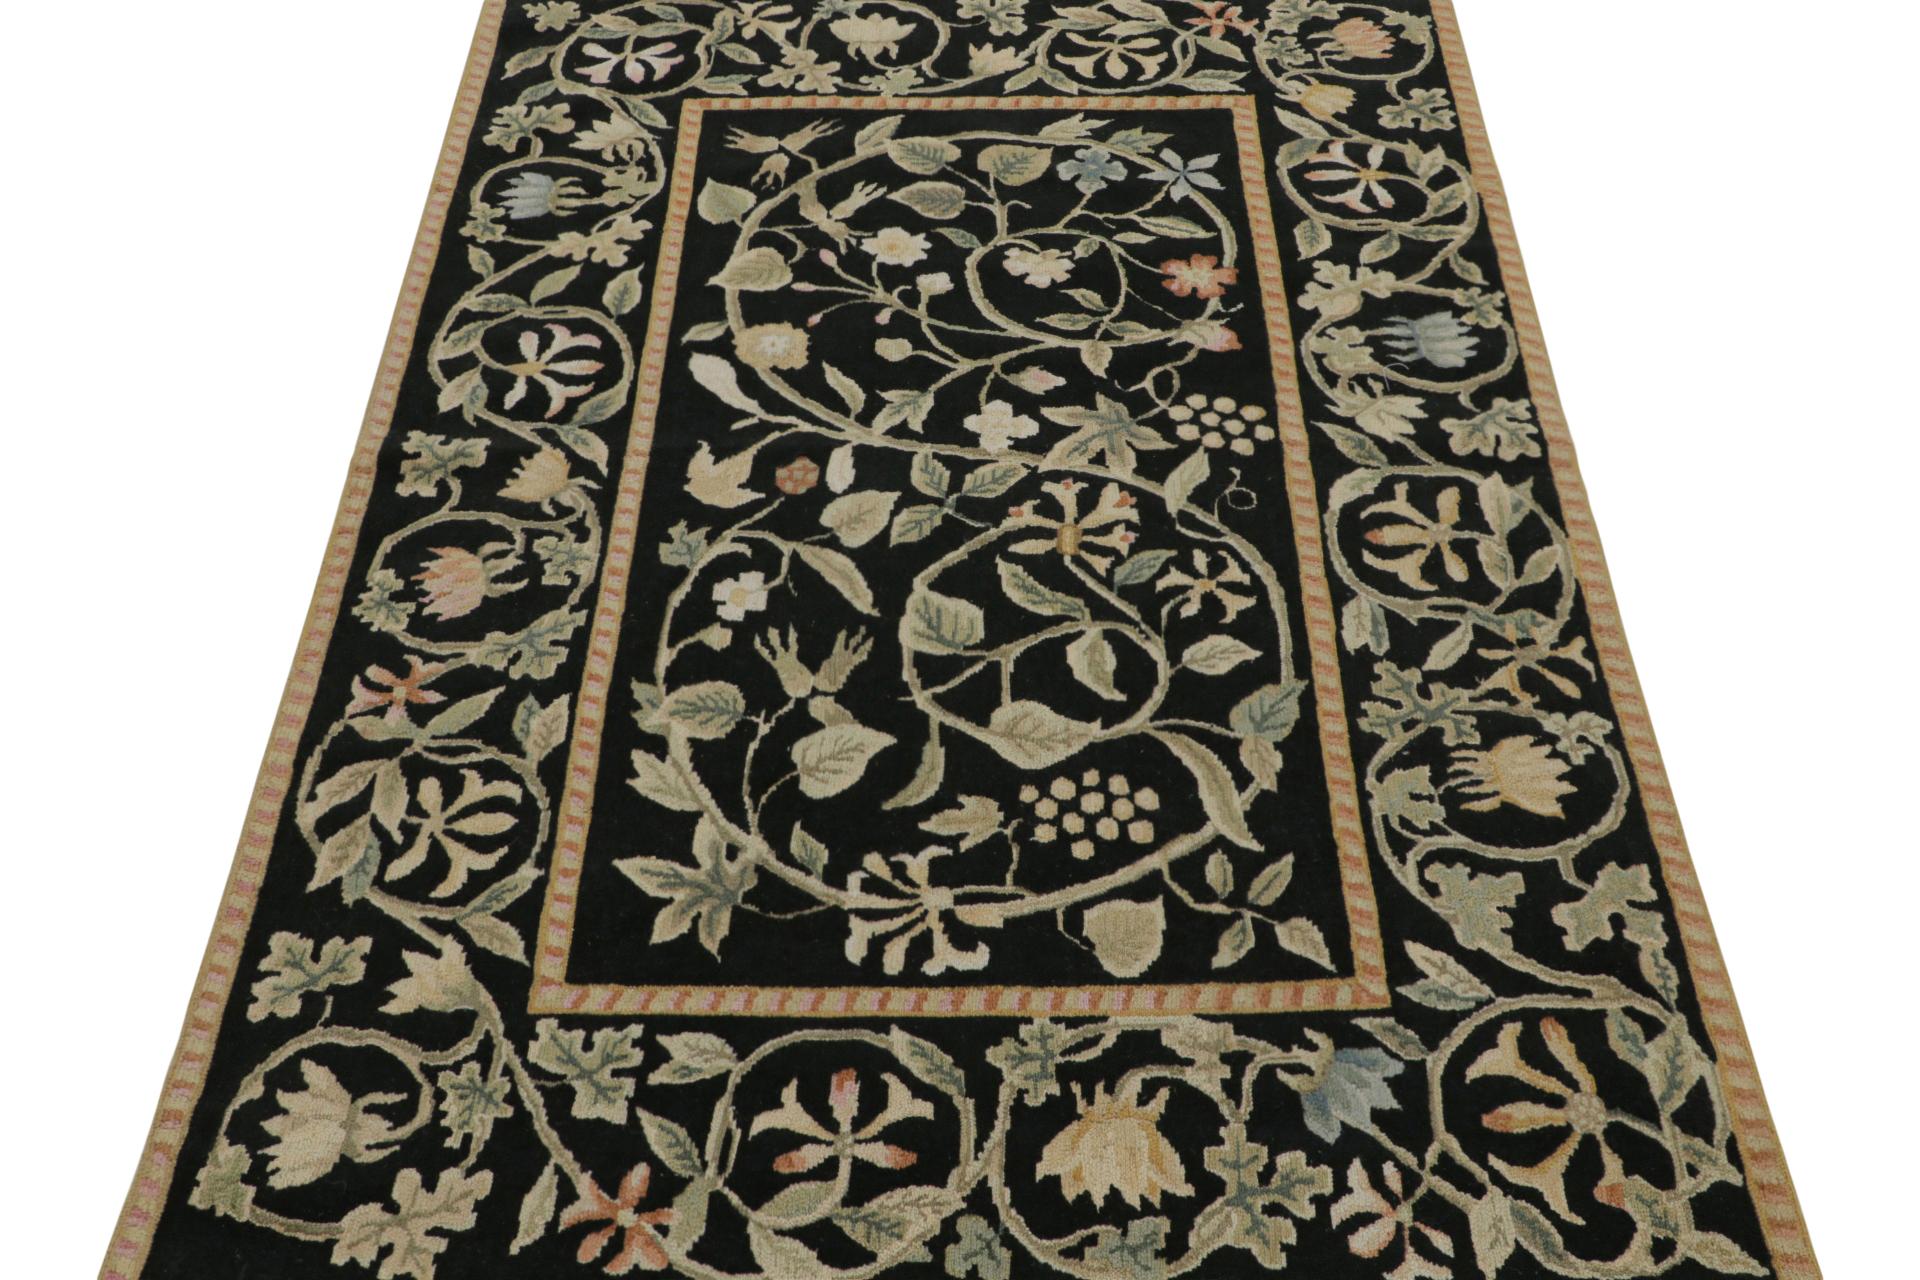 Tudor Rug & kilim’s European Style Rug in Black with Beige and Green Floral Patterns For Sale